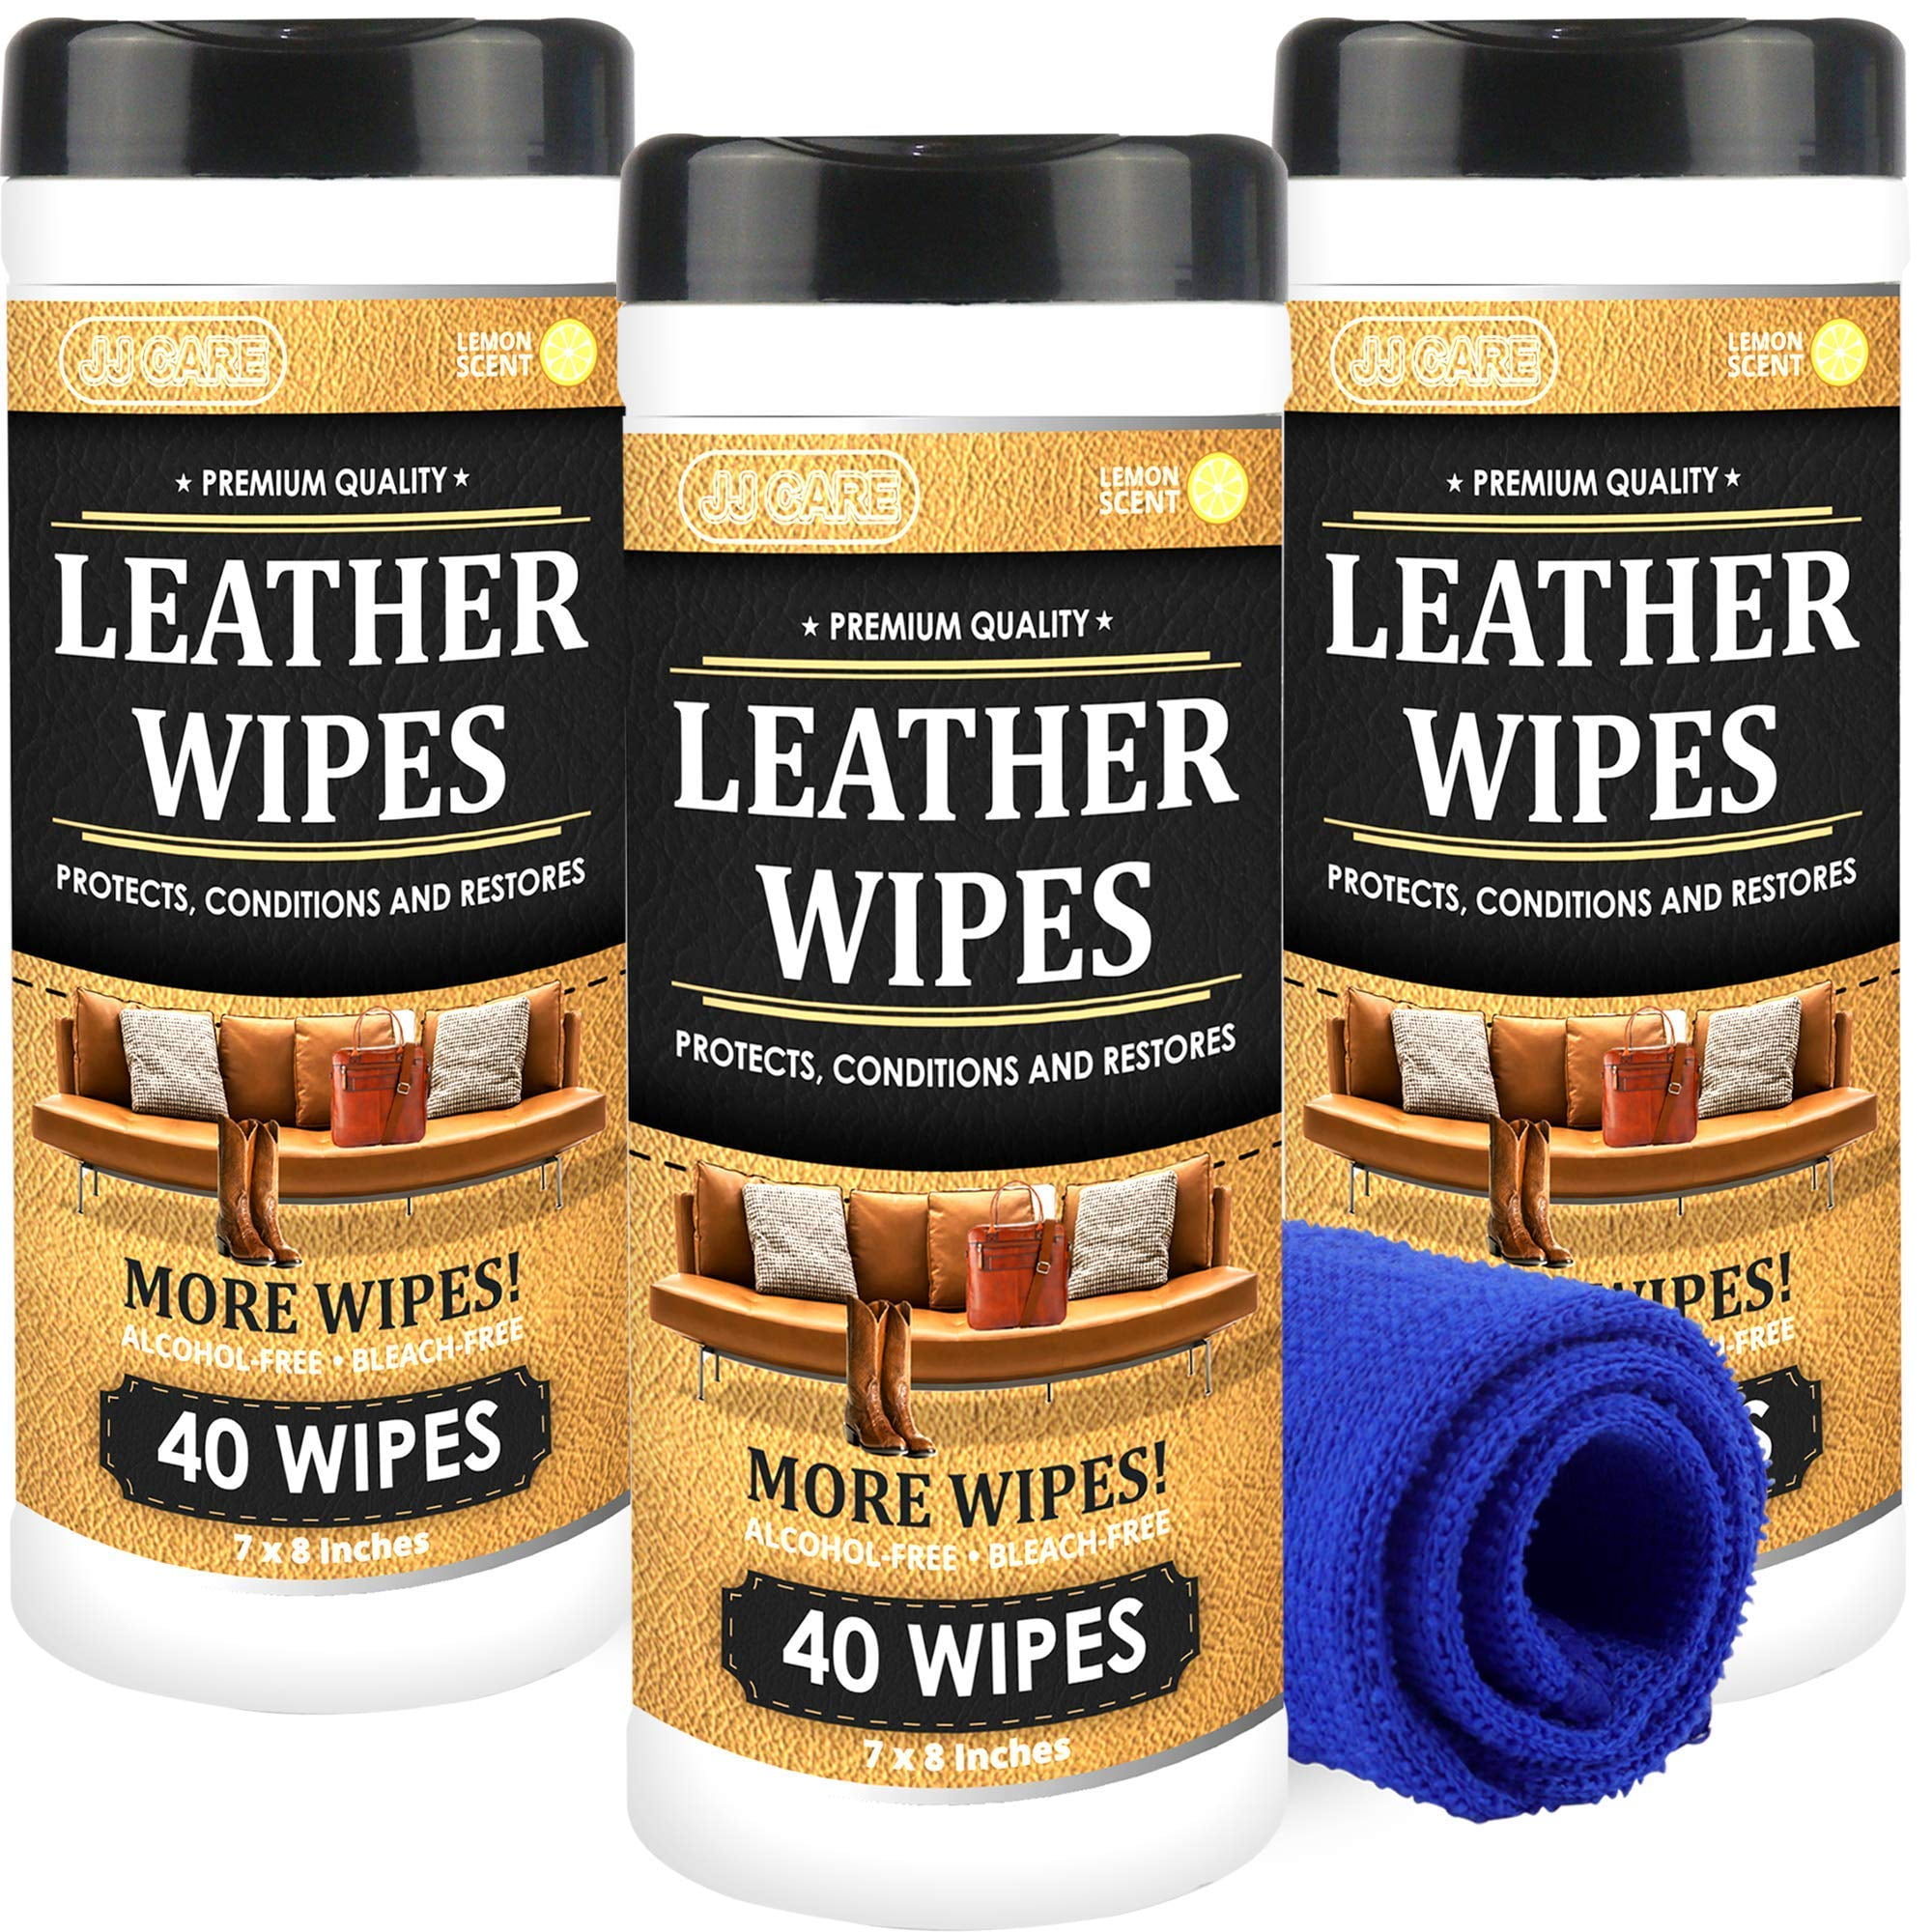 JJ CARE Leather Wipes for Car Interior Cleaning [Pack of 120 with Free  Microfiber Cloth] Leather Wipes for Purses, Couch, Car Seats, Furniture,  Shoes, Boots, Faux Leather and More. 